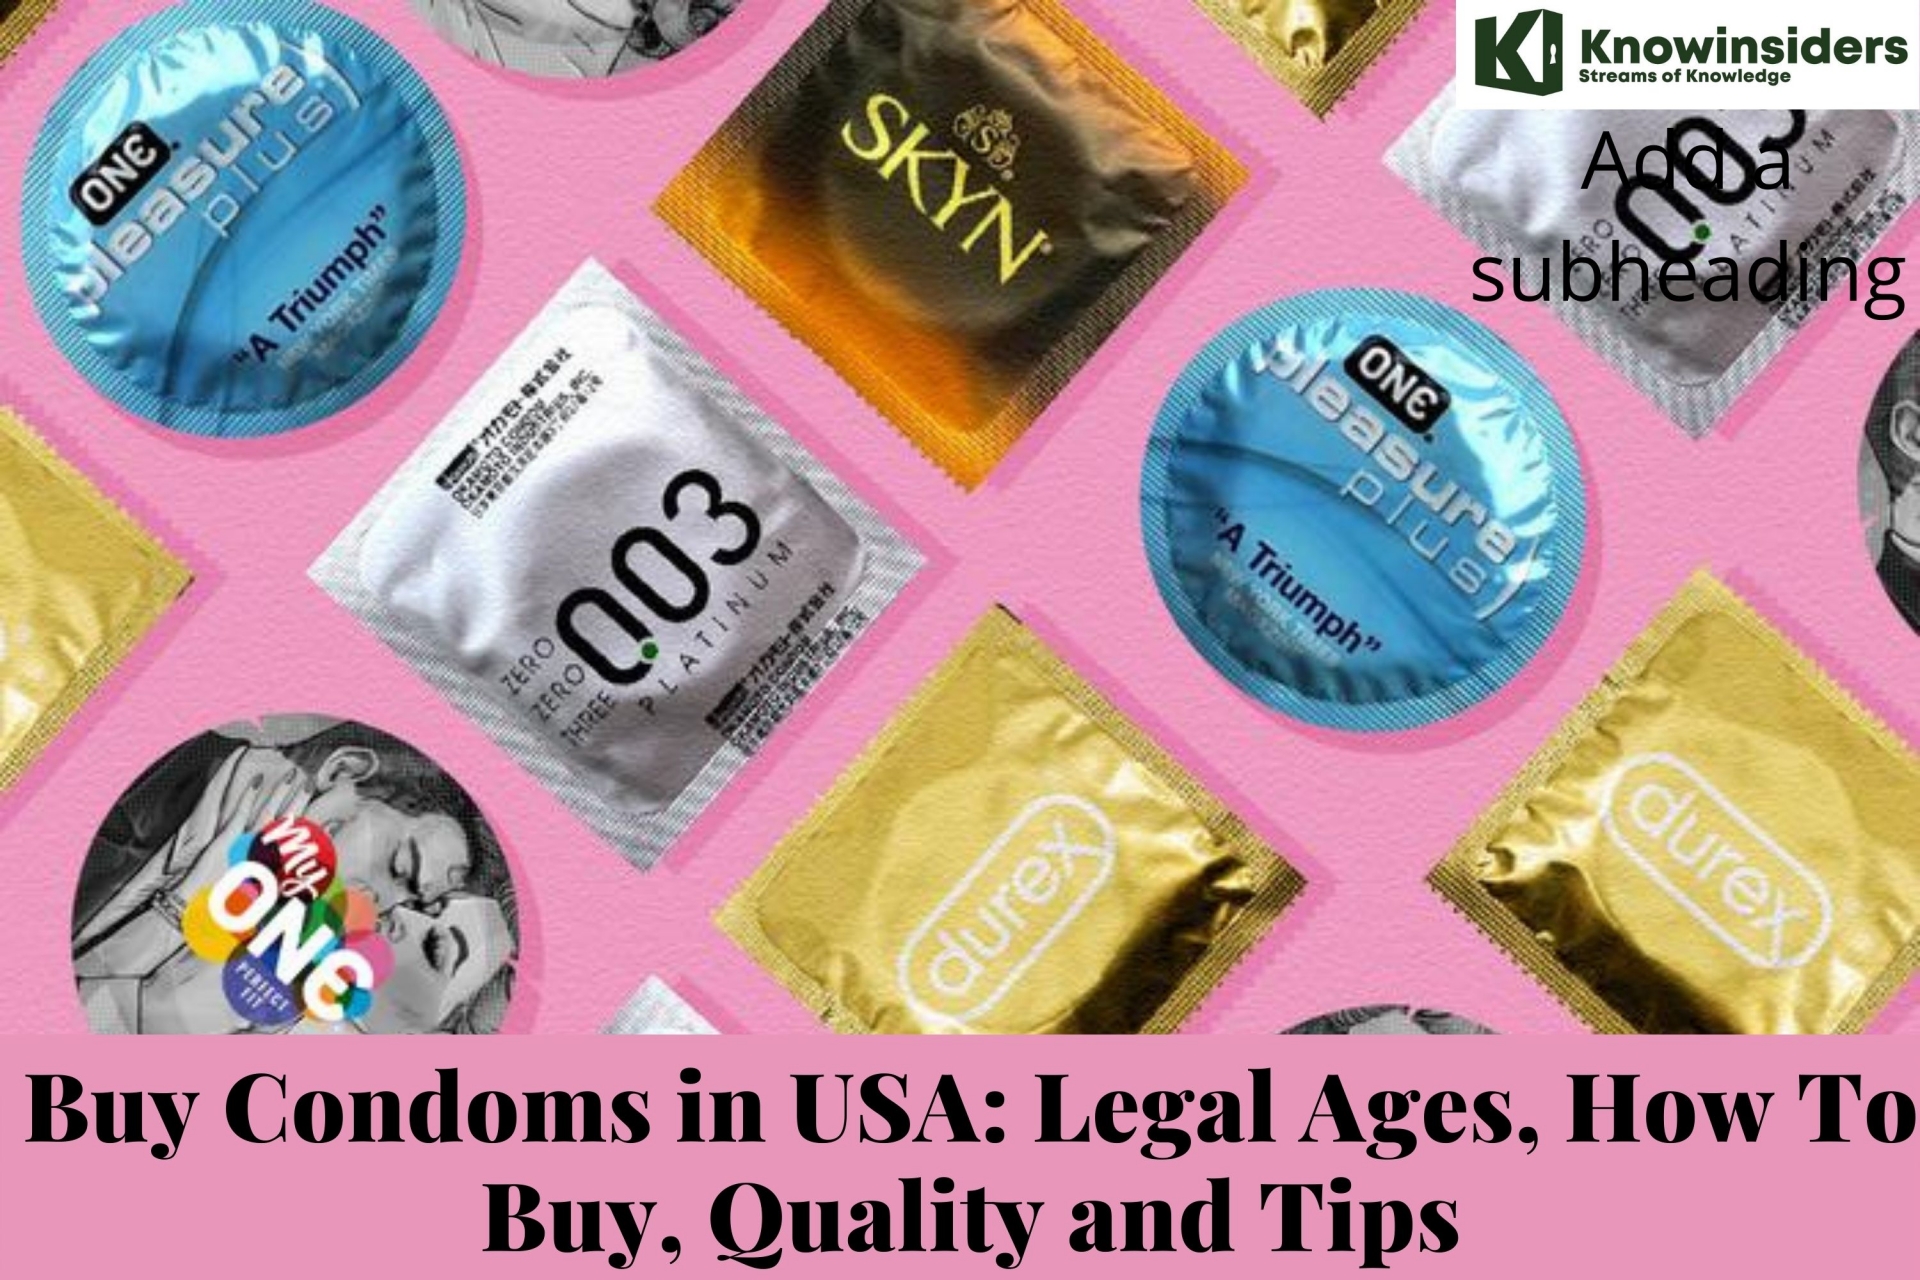 Buy Condoms in USA Legal Ages, How To Buy, Quality and Tips